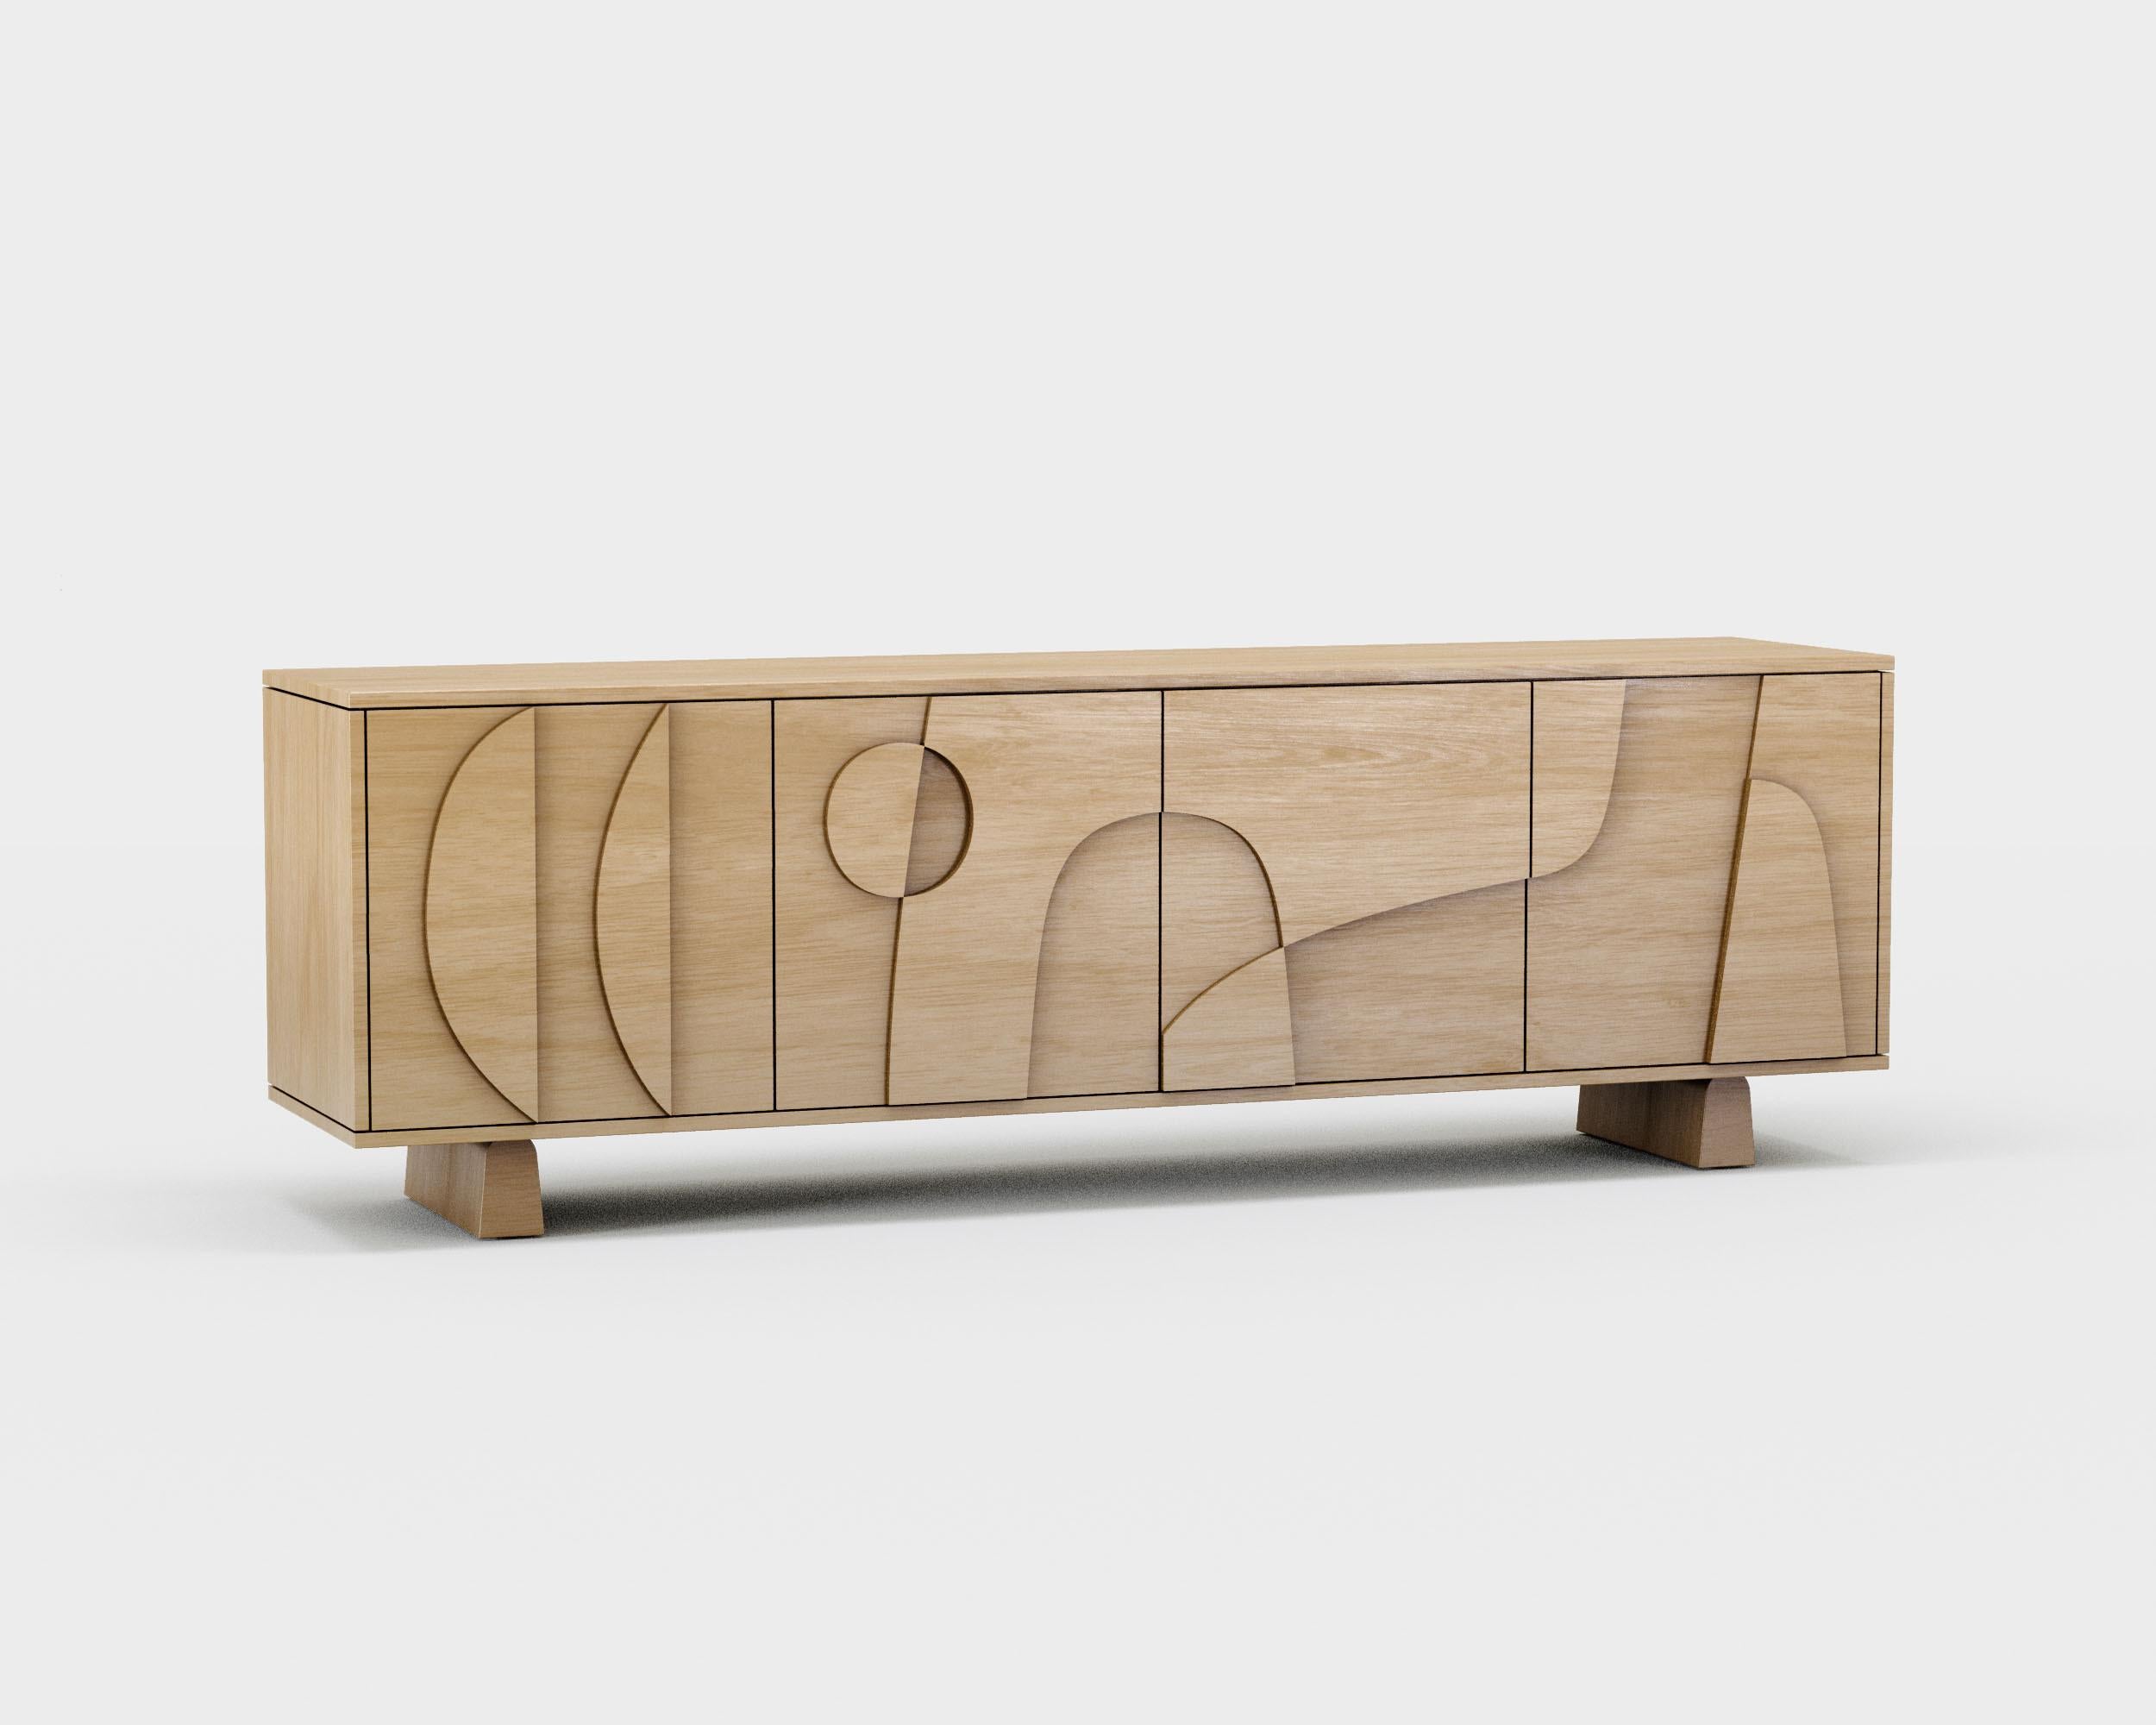 'Wynwood' 4 Sideboard by Man of Parts
Signed by Sebastian Herkner

Dimensions: H. 68 x 49 x 213.5 cm
Available in various finishes: Black oak, nude oak, whiskey oak
Leg height available: Tall, Short, Wall mount

Model shown: Nude oak finish, Short